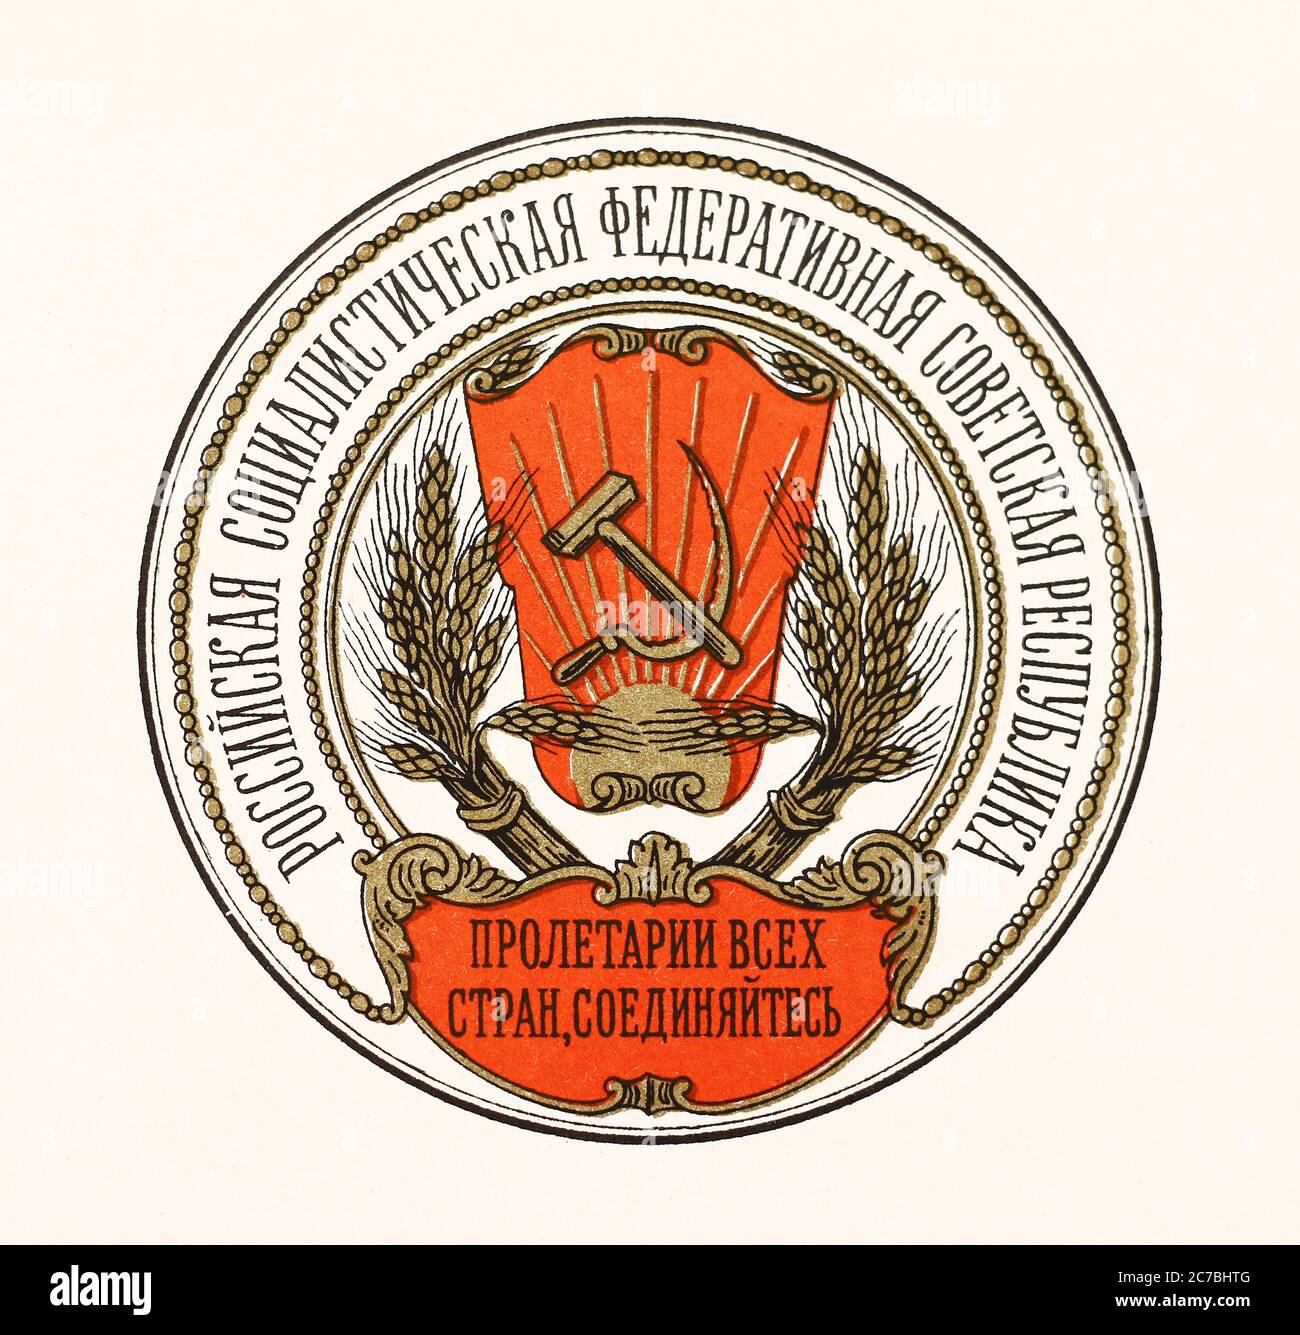 Coat of arms of the Russian Socialist Federal Soviet Republic (R.S.F.S.R.). Stock Photo